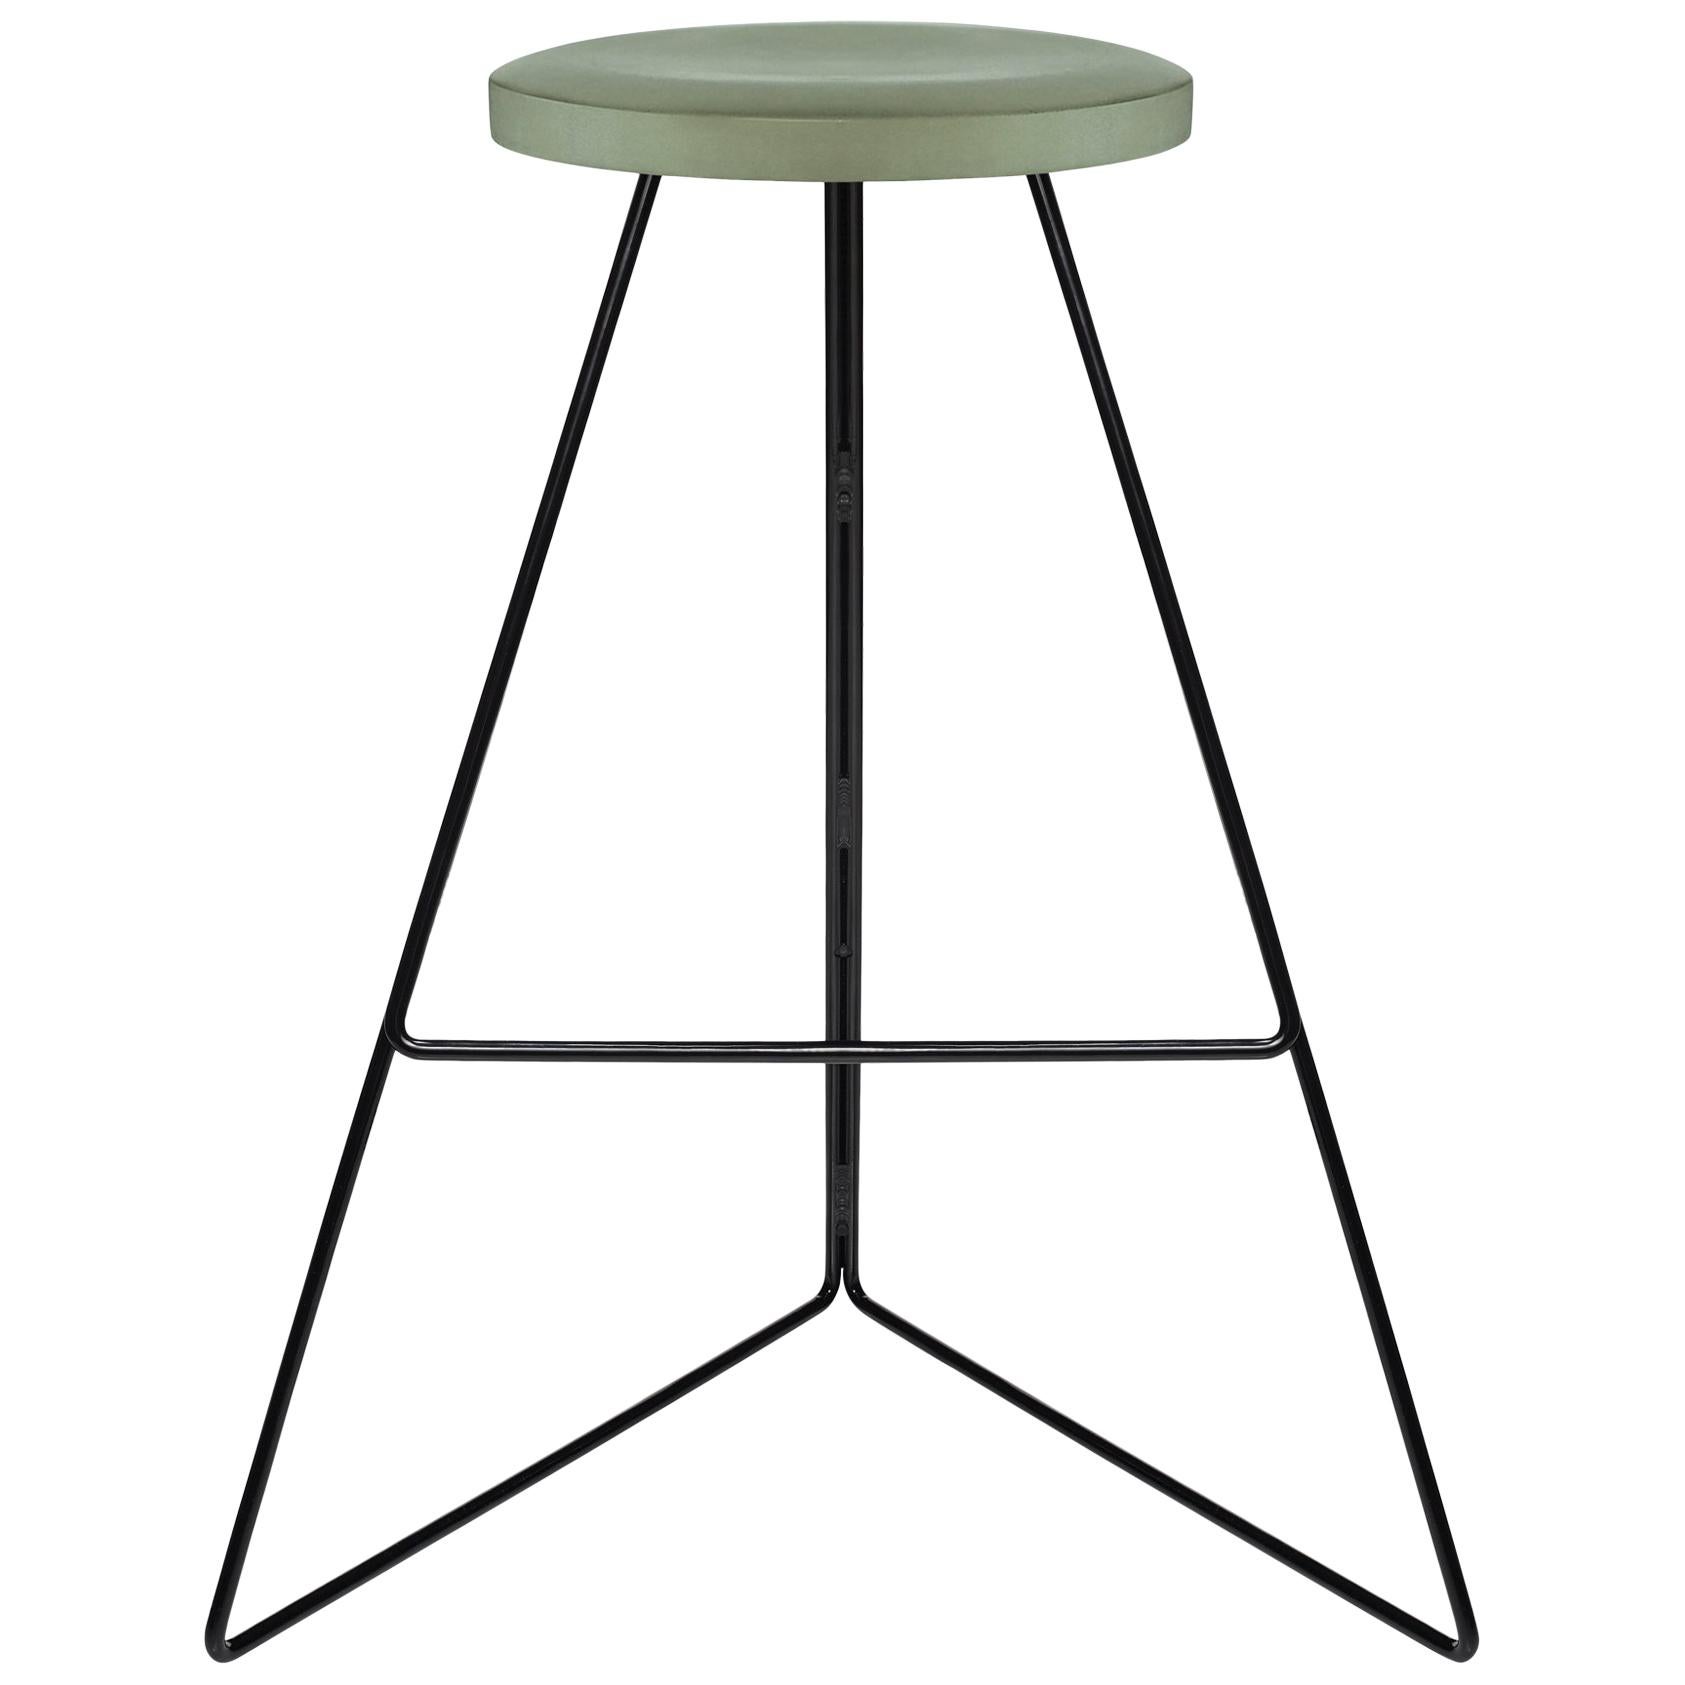 Coleman Stool - Aspen Concrete Seat and Black Steel Base, 24" Counter Height For Sale